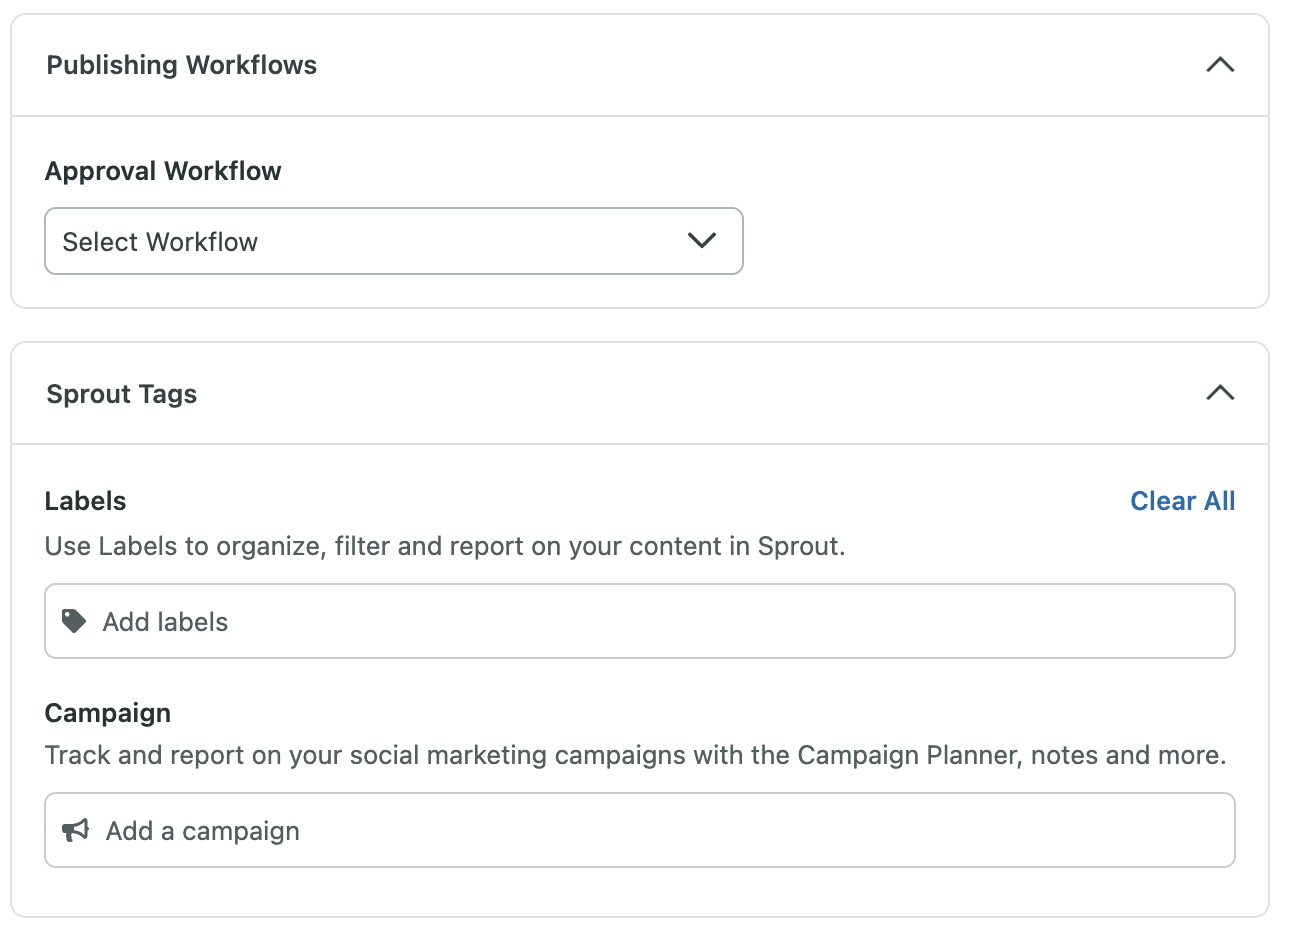 Several dropdown menus in the new post window of Sprout where you can select an Approval Workflow and tags and a campaign for your content